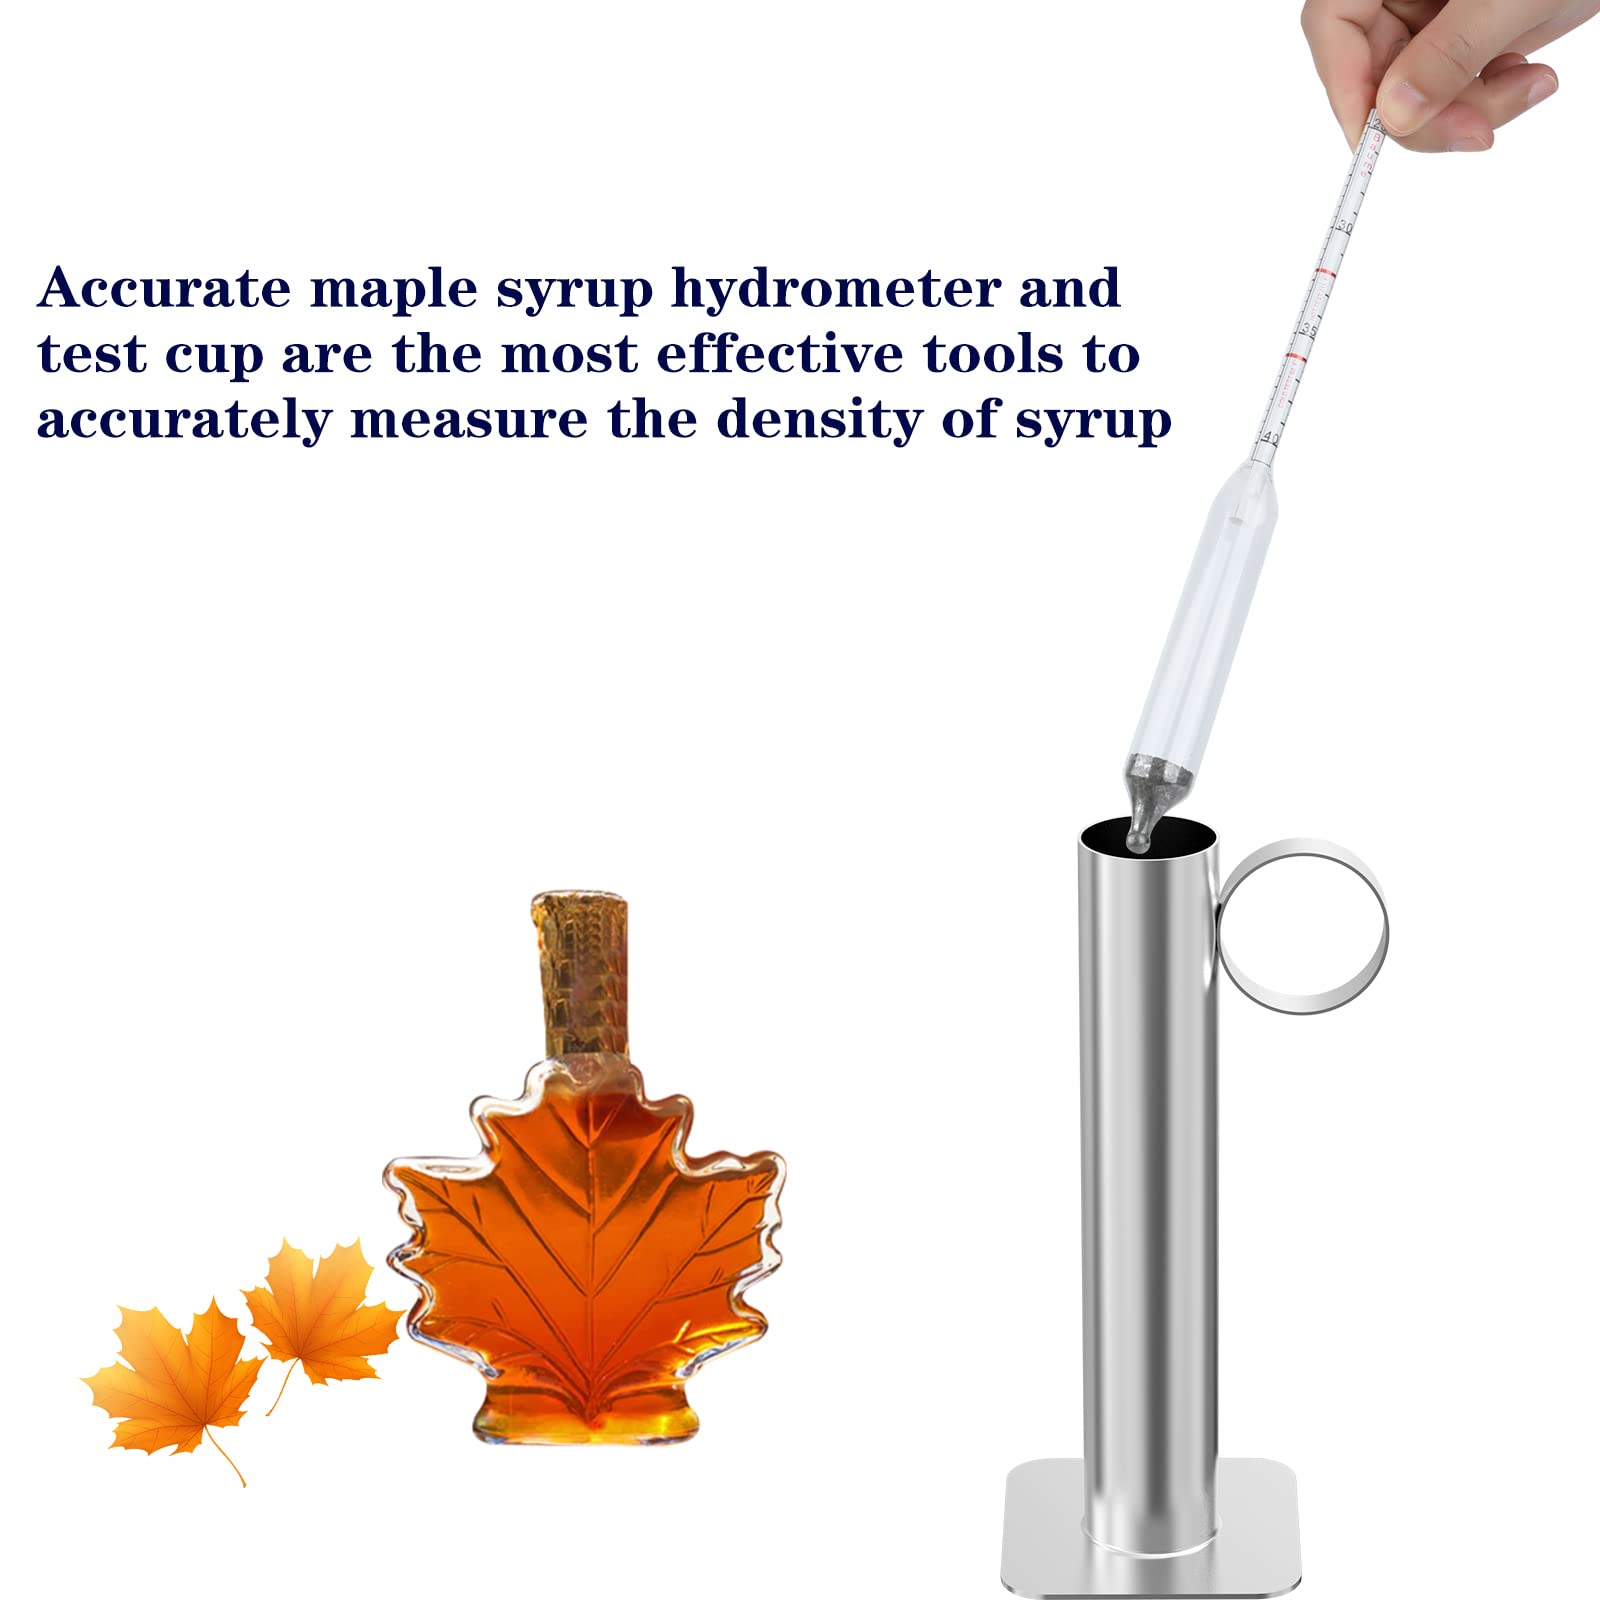 Maple Syrup Hydrometer Test Cup kit, Maple Syrup Density Kit, Measures Sugar Content in The Syrup, Stainless Steel Maple Syrup Kit, Easy to Read and Accurate, with Cleaning Brush